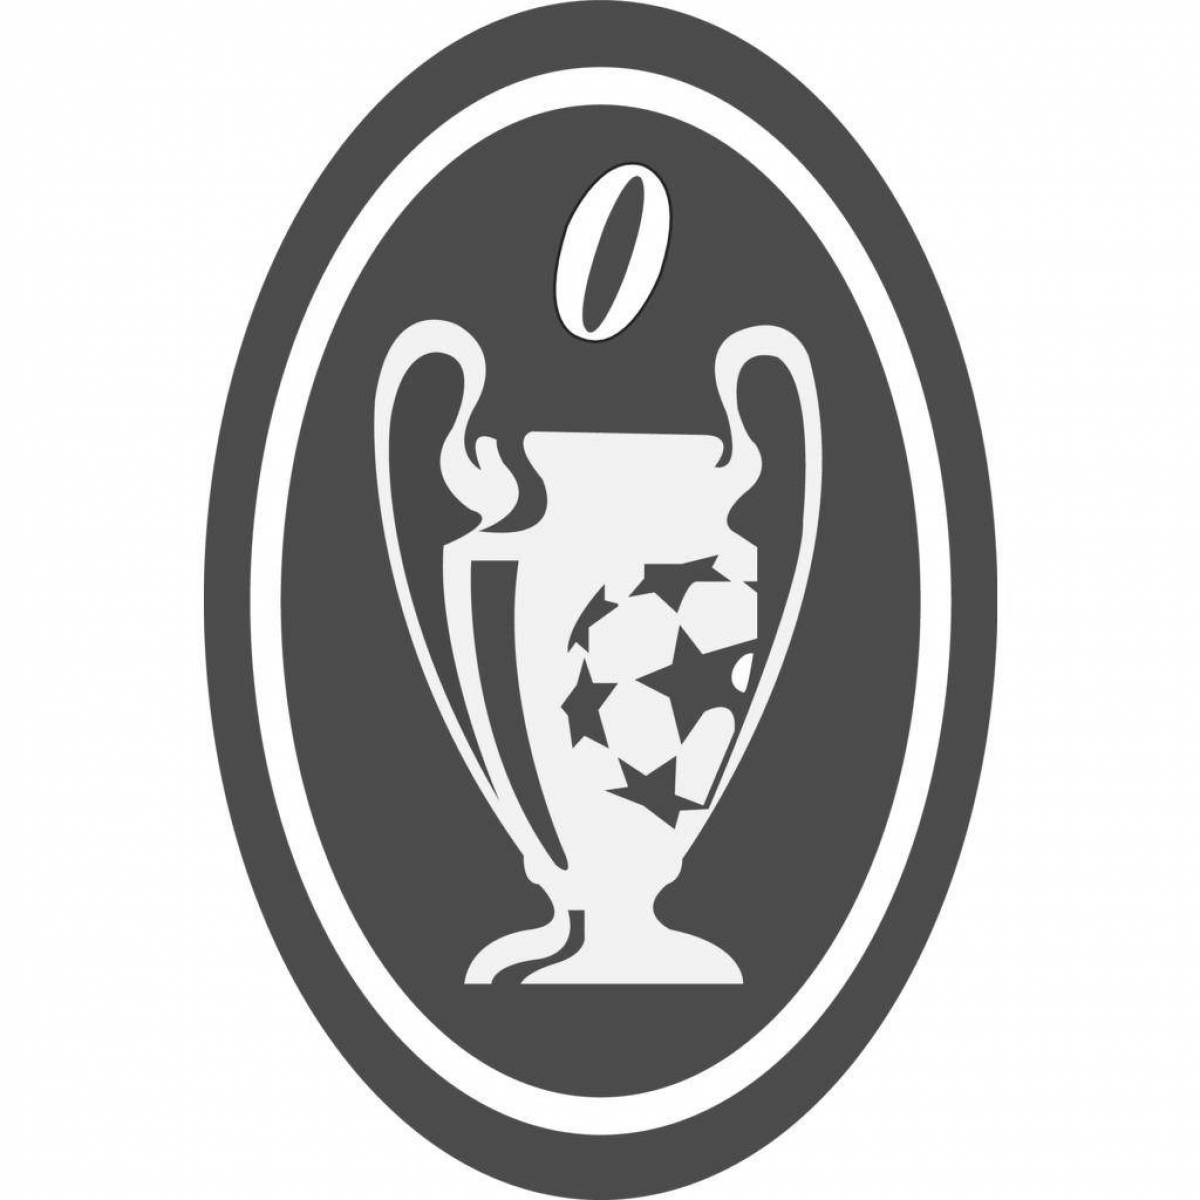 Champions League cup coloring page with colorful engraving